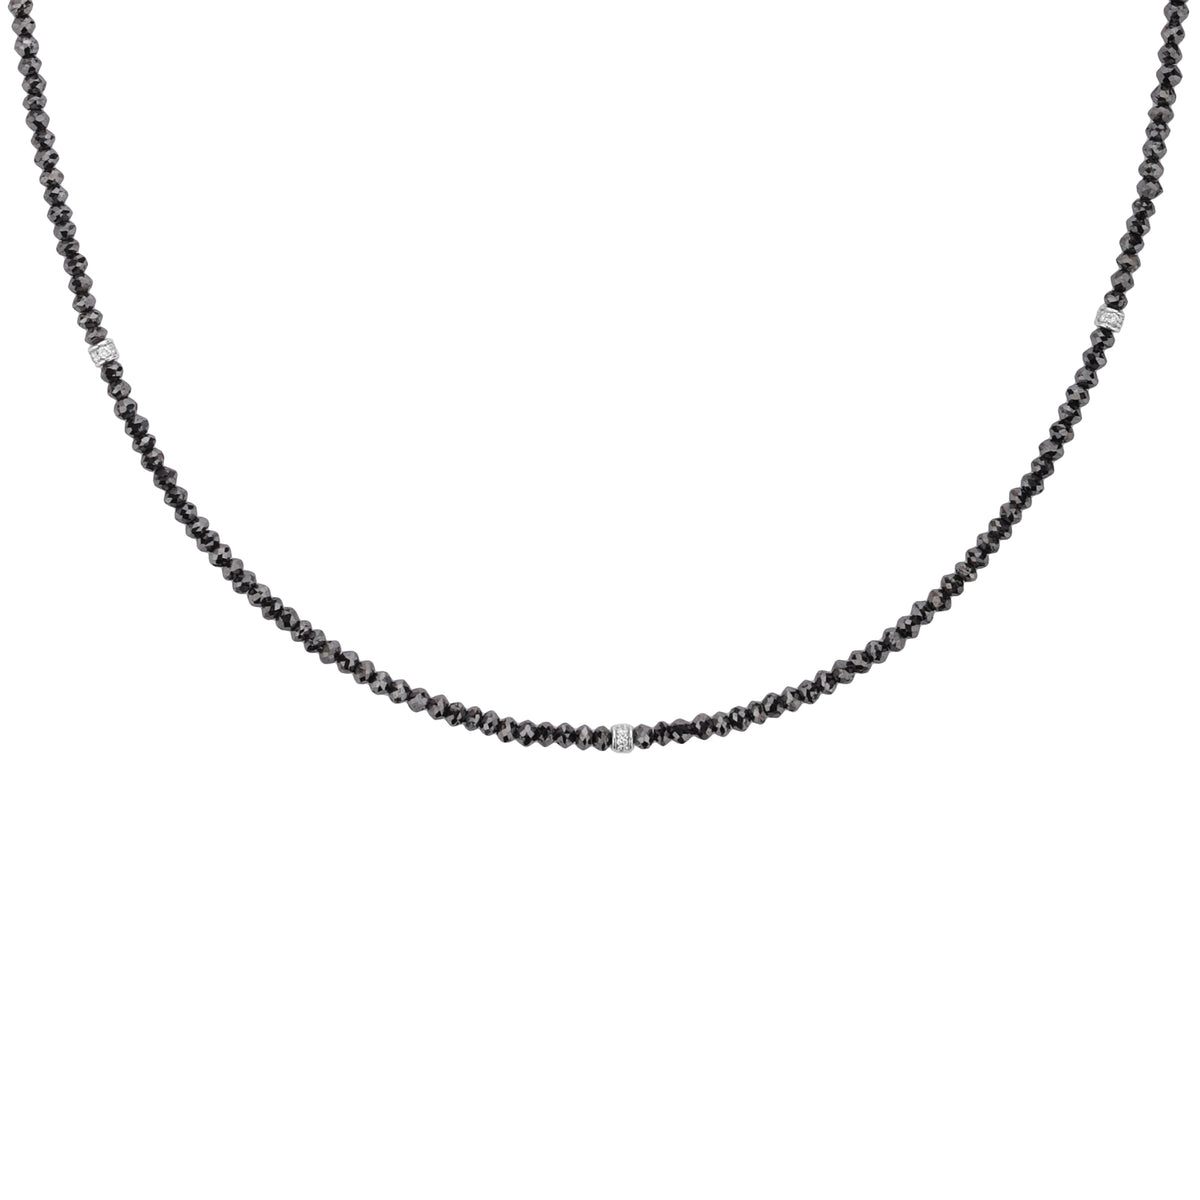 Exclusive black diamond necklace - timeless elegance and luxury